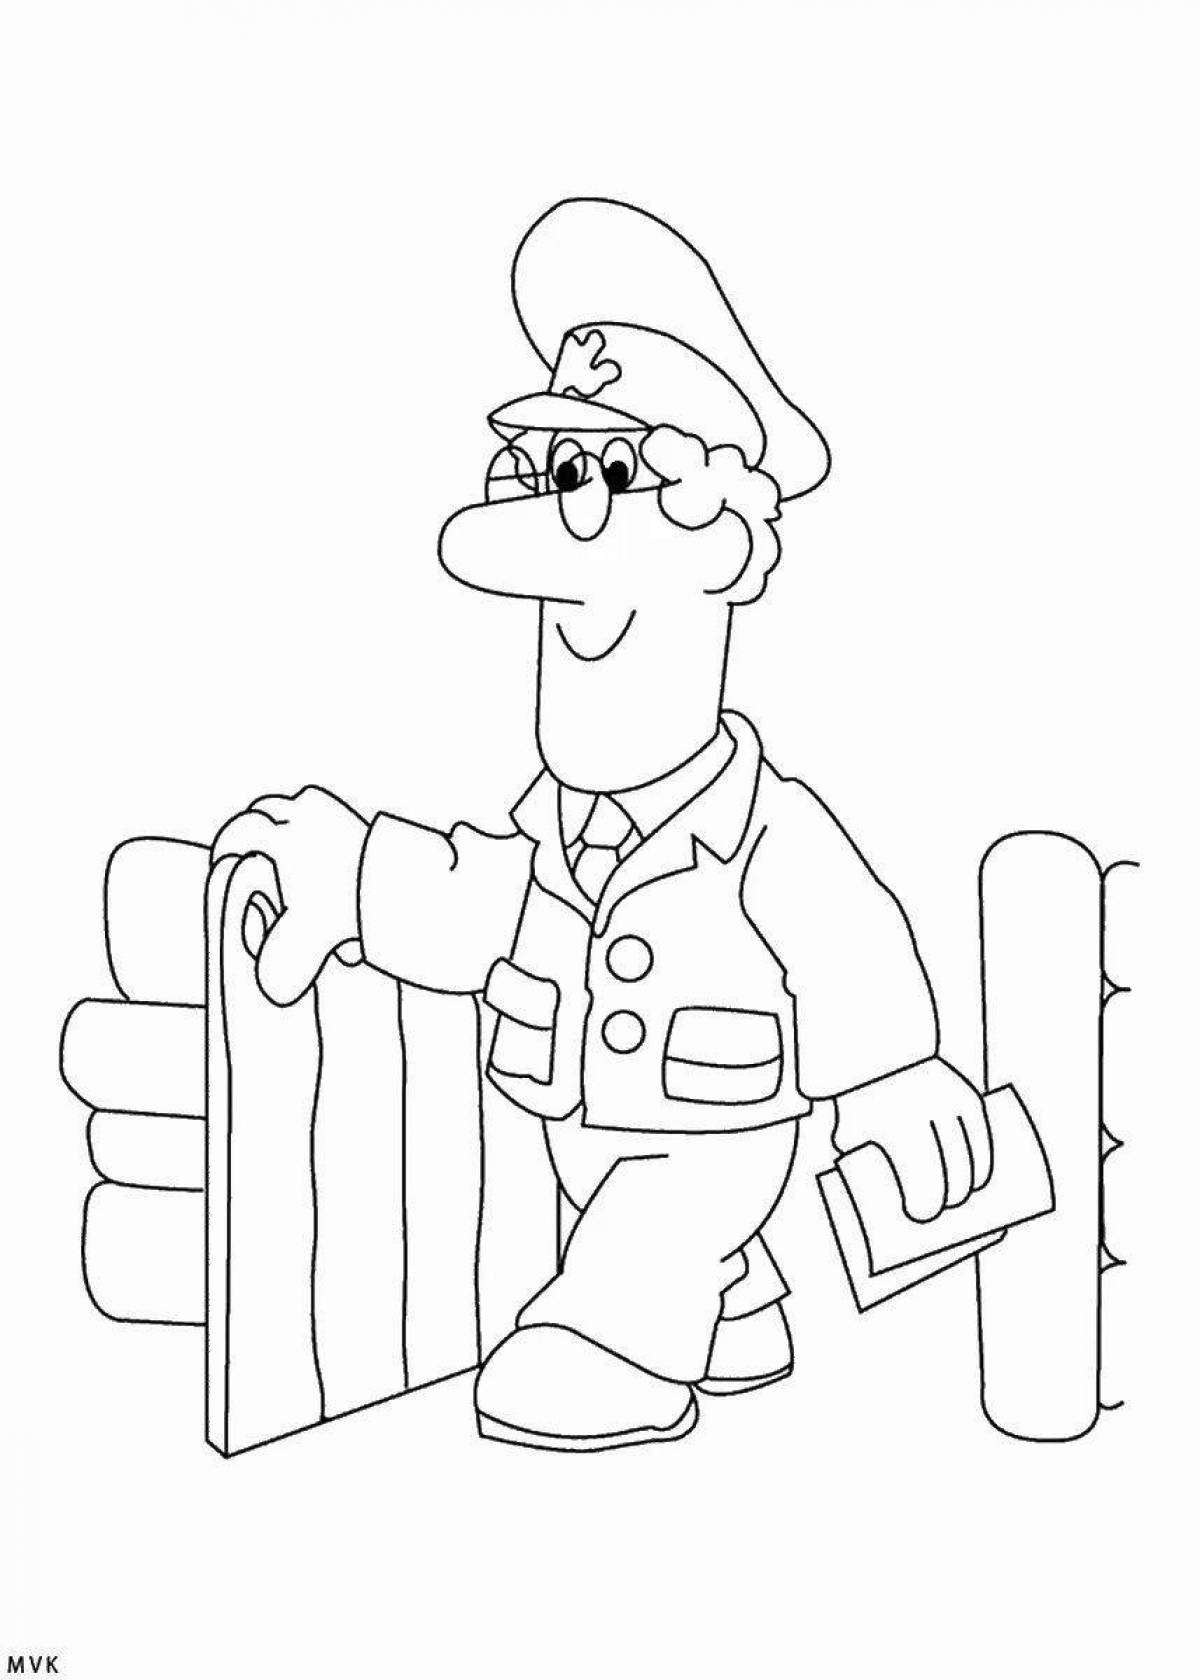 Adorable postman coloring page for preschoolers